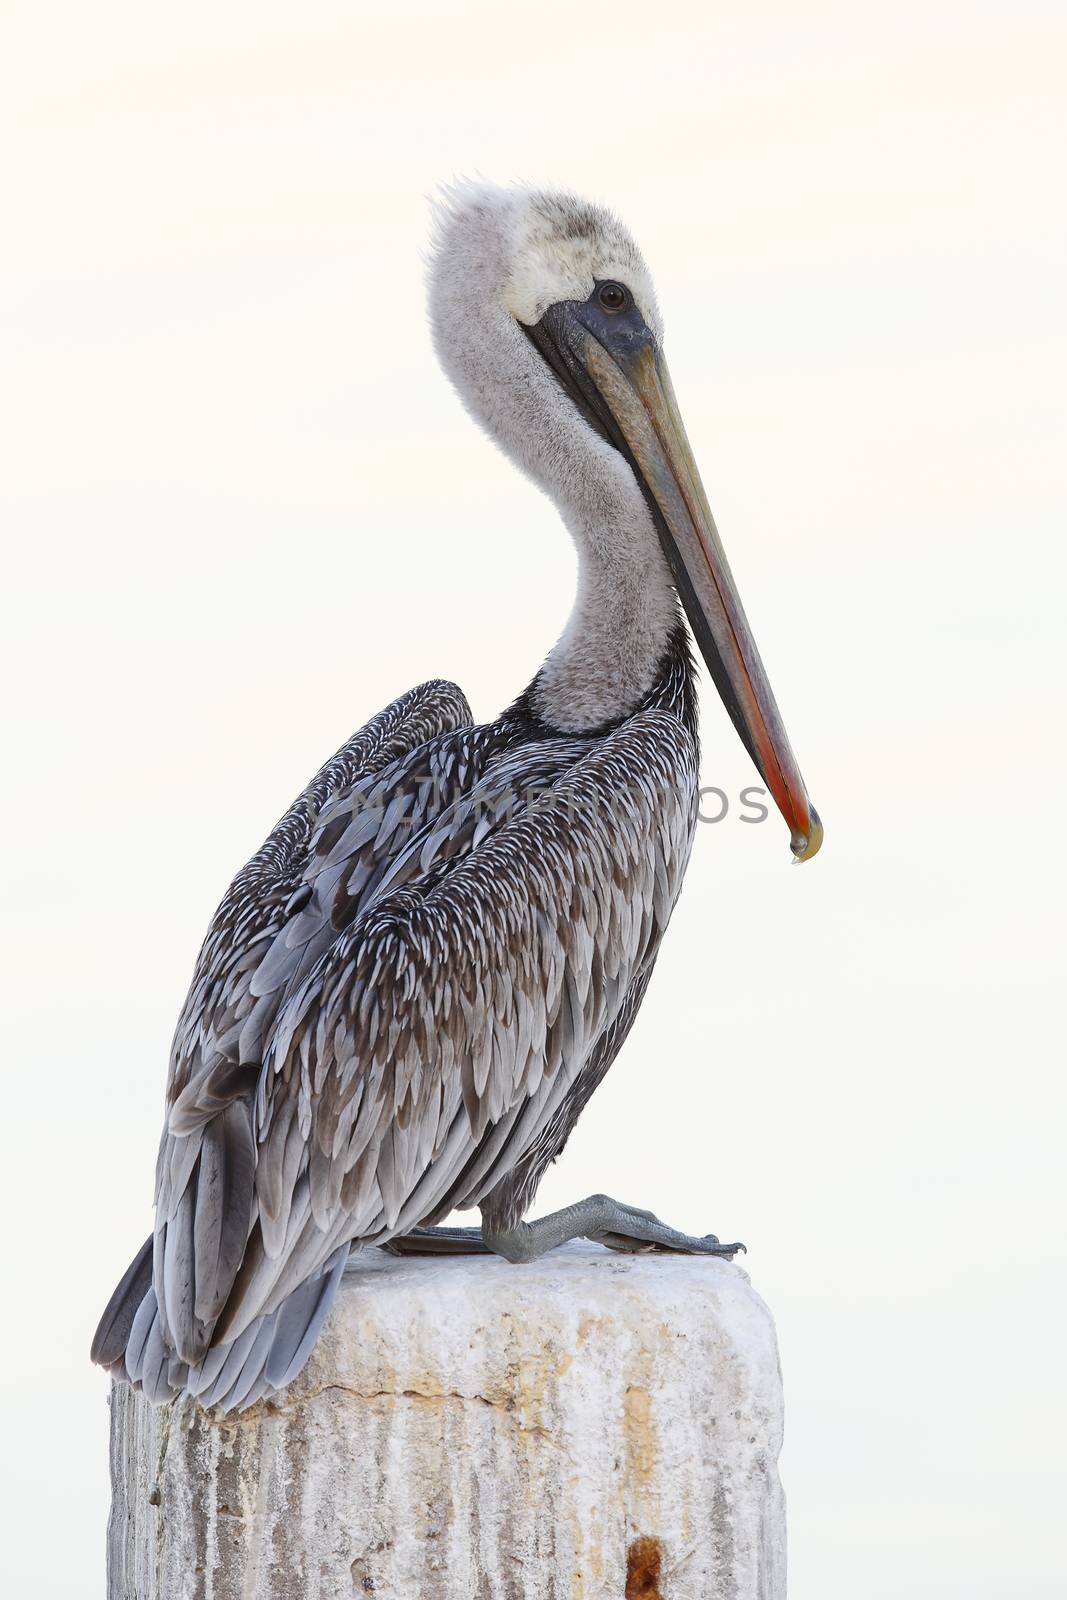 Immature Brown Pelican perched on a dock piling - Florida by gonepaddling